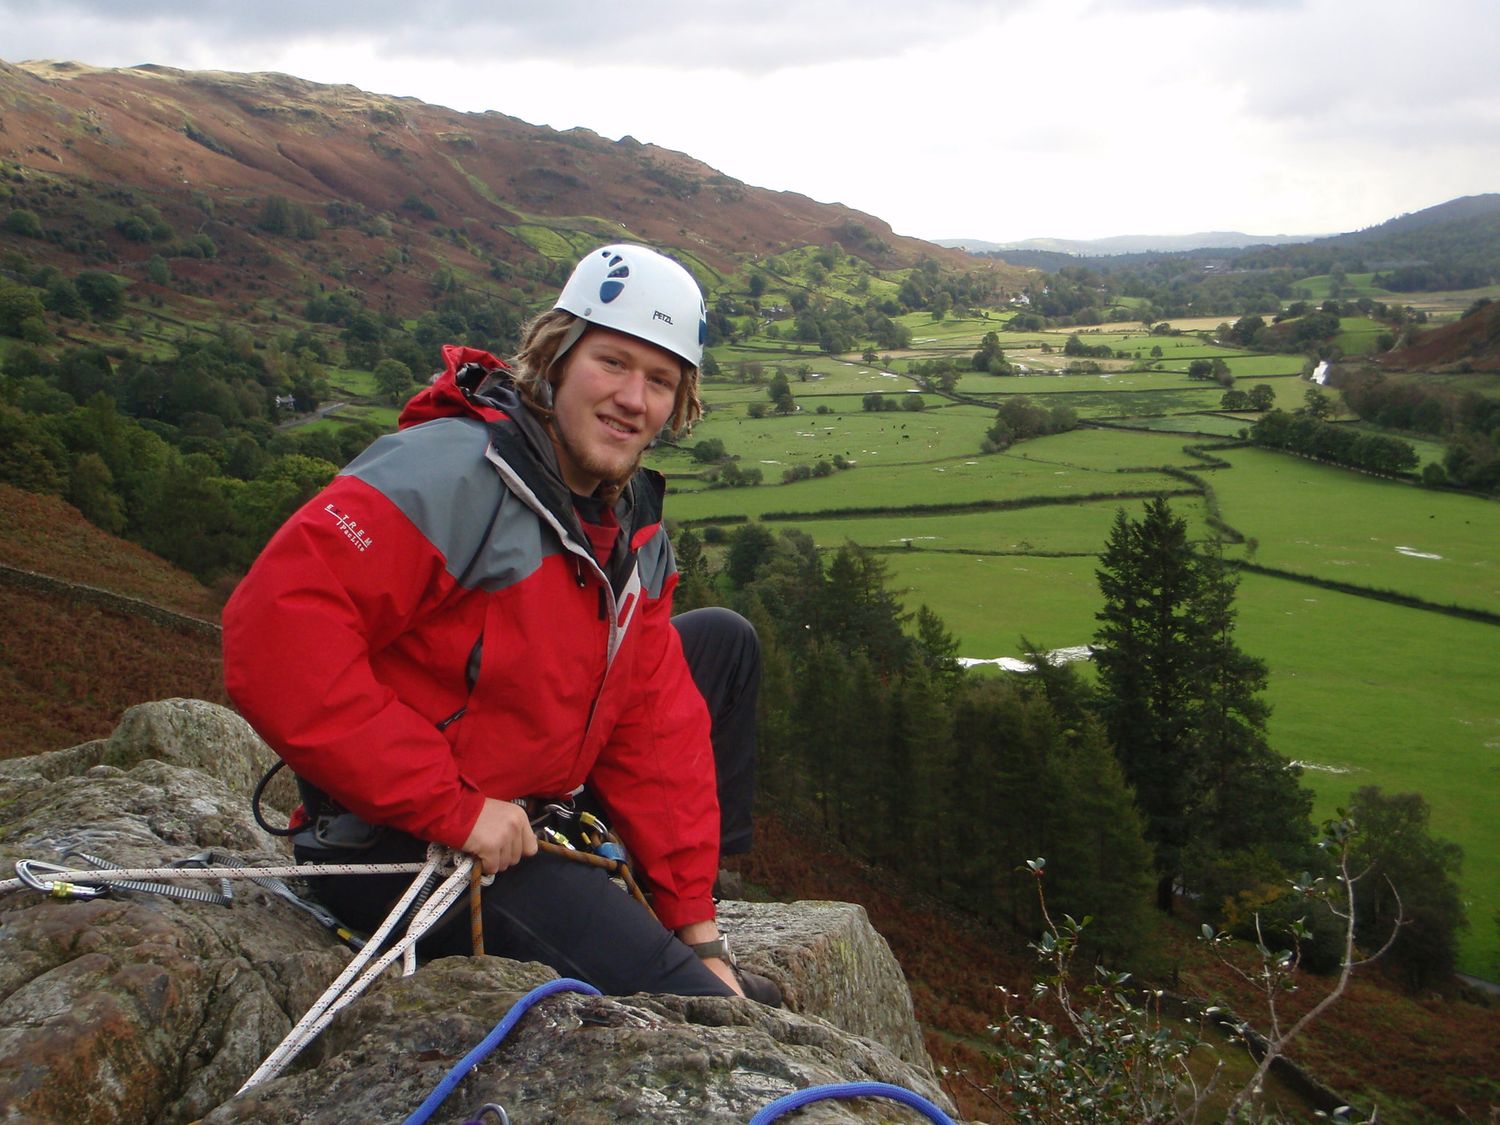  Belaying at the top of a route on a Rock Climbing Instructor course - Chris Ensoll Mountain Guide 